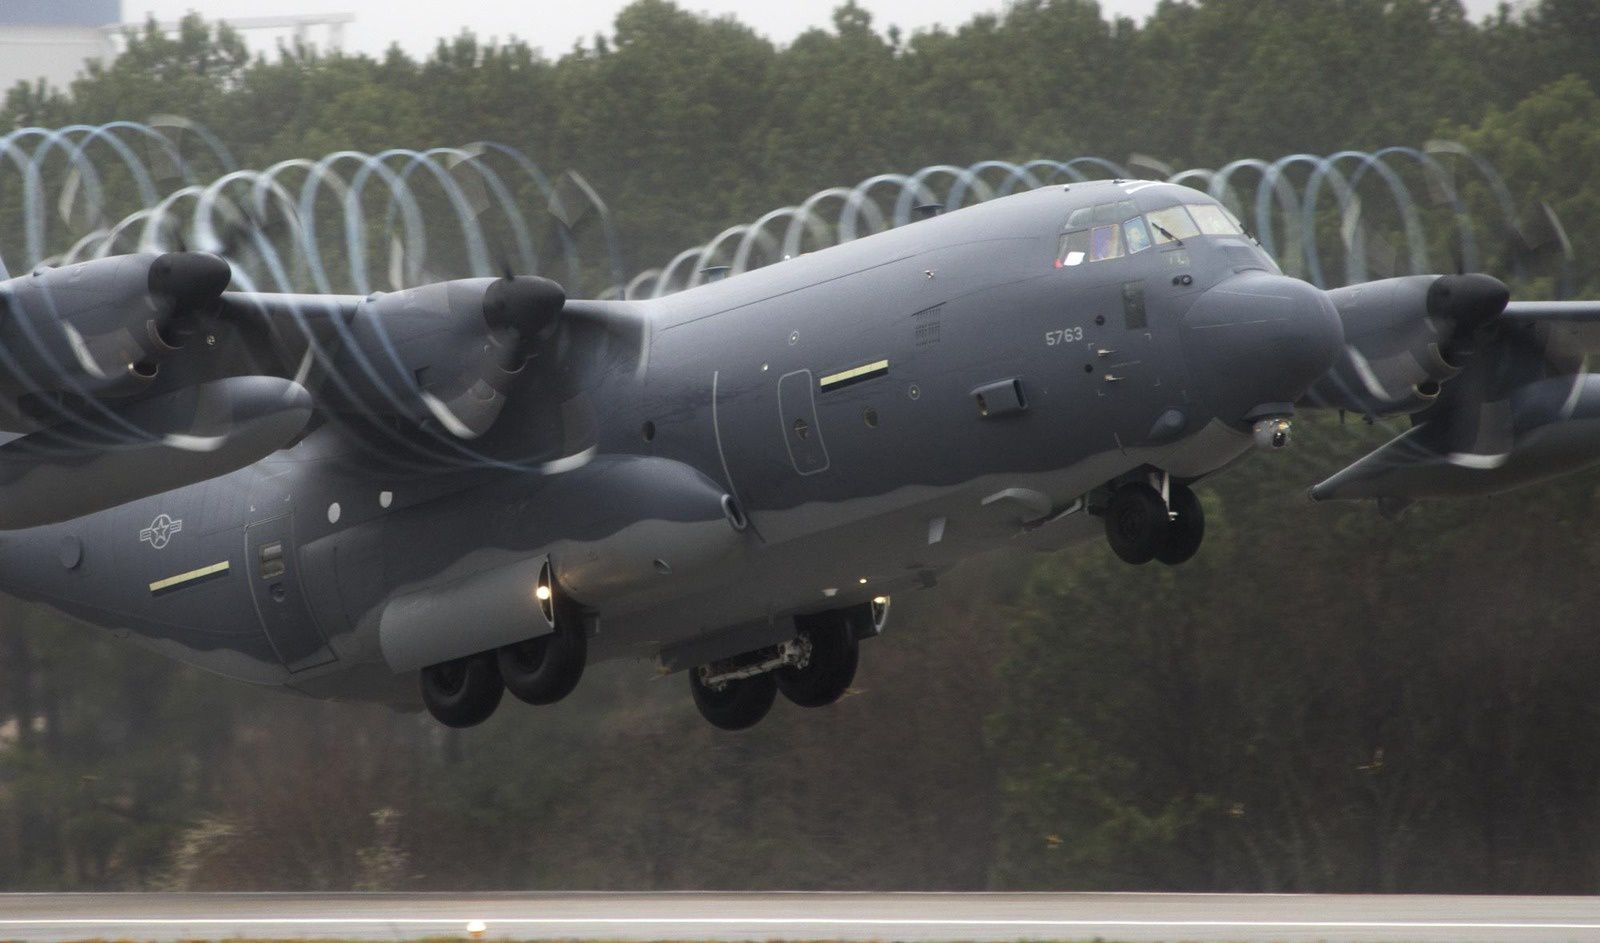 USAF MC-130J Commando II Special Operations tanker aircraft – photo Andrew McMurtrie LM